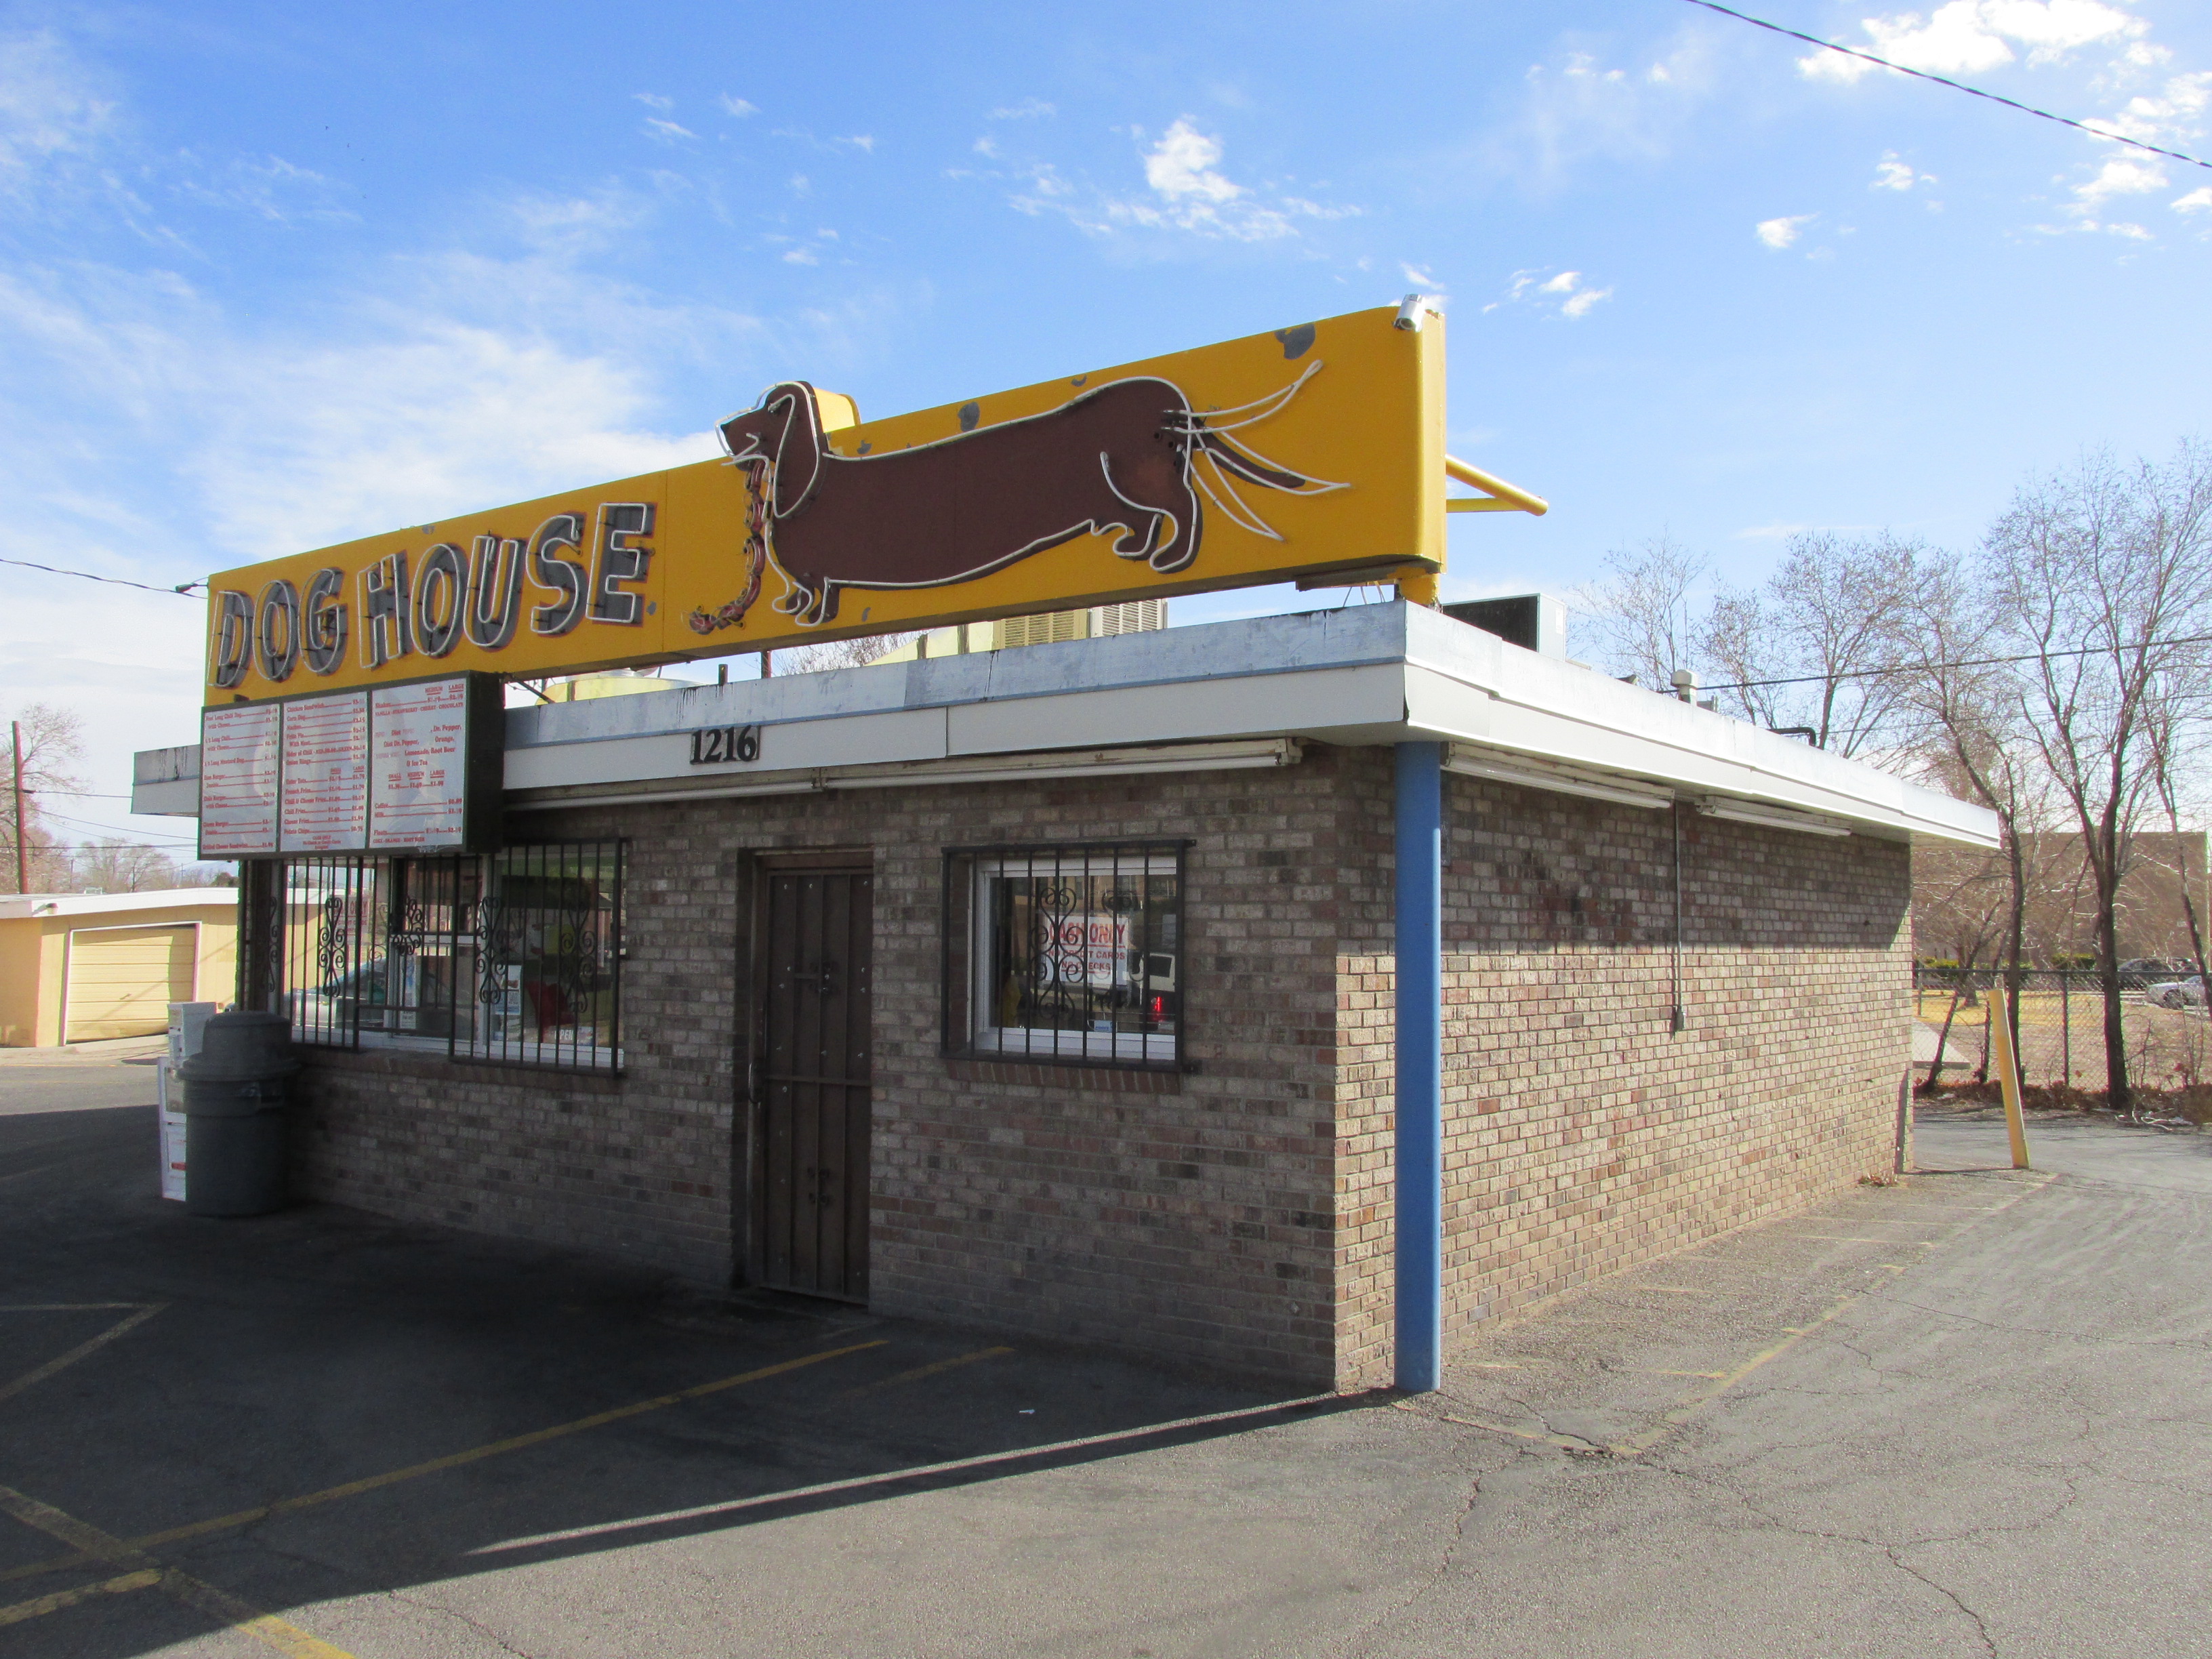 File:Dog House Drive In, Albuquerque NM.jpg - Wikimedia Commons